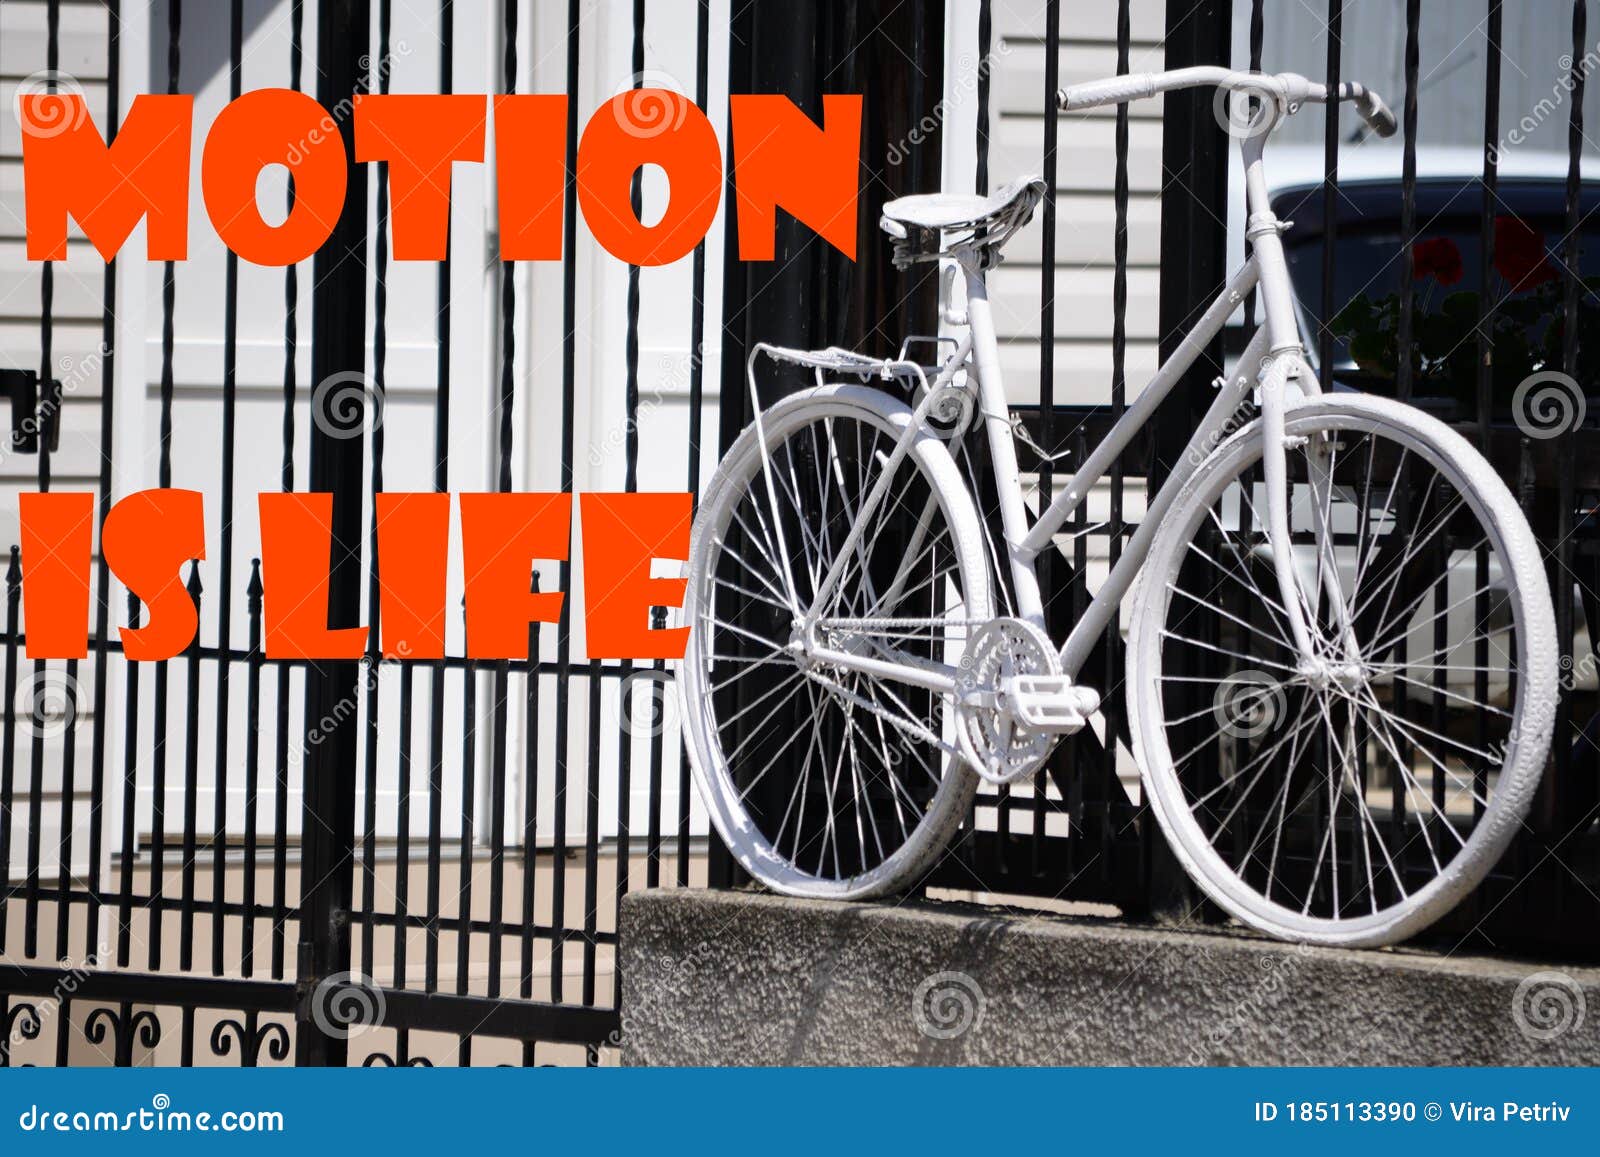 Motion Is Life, Motivational Phrases For Every Day Stock Photo - Image